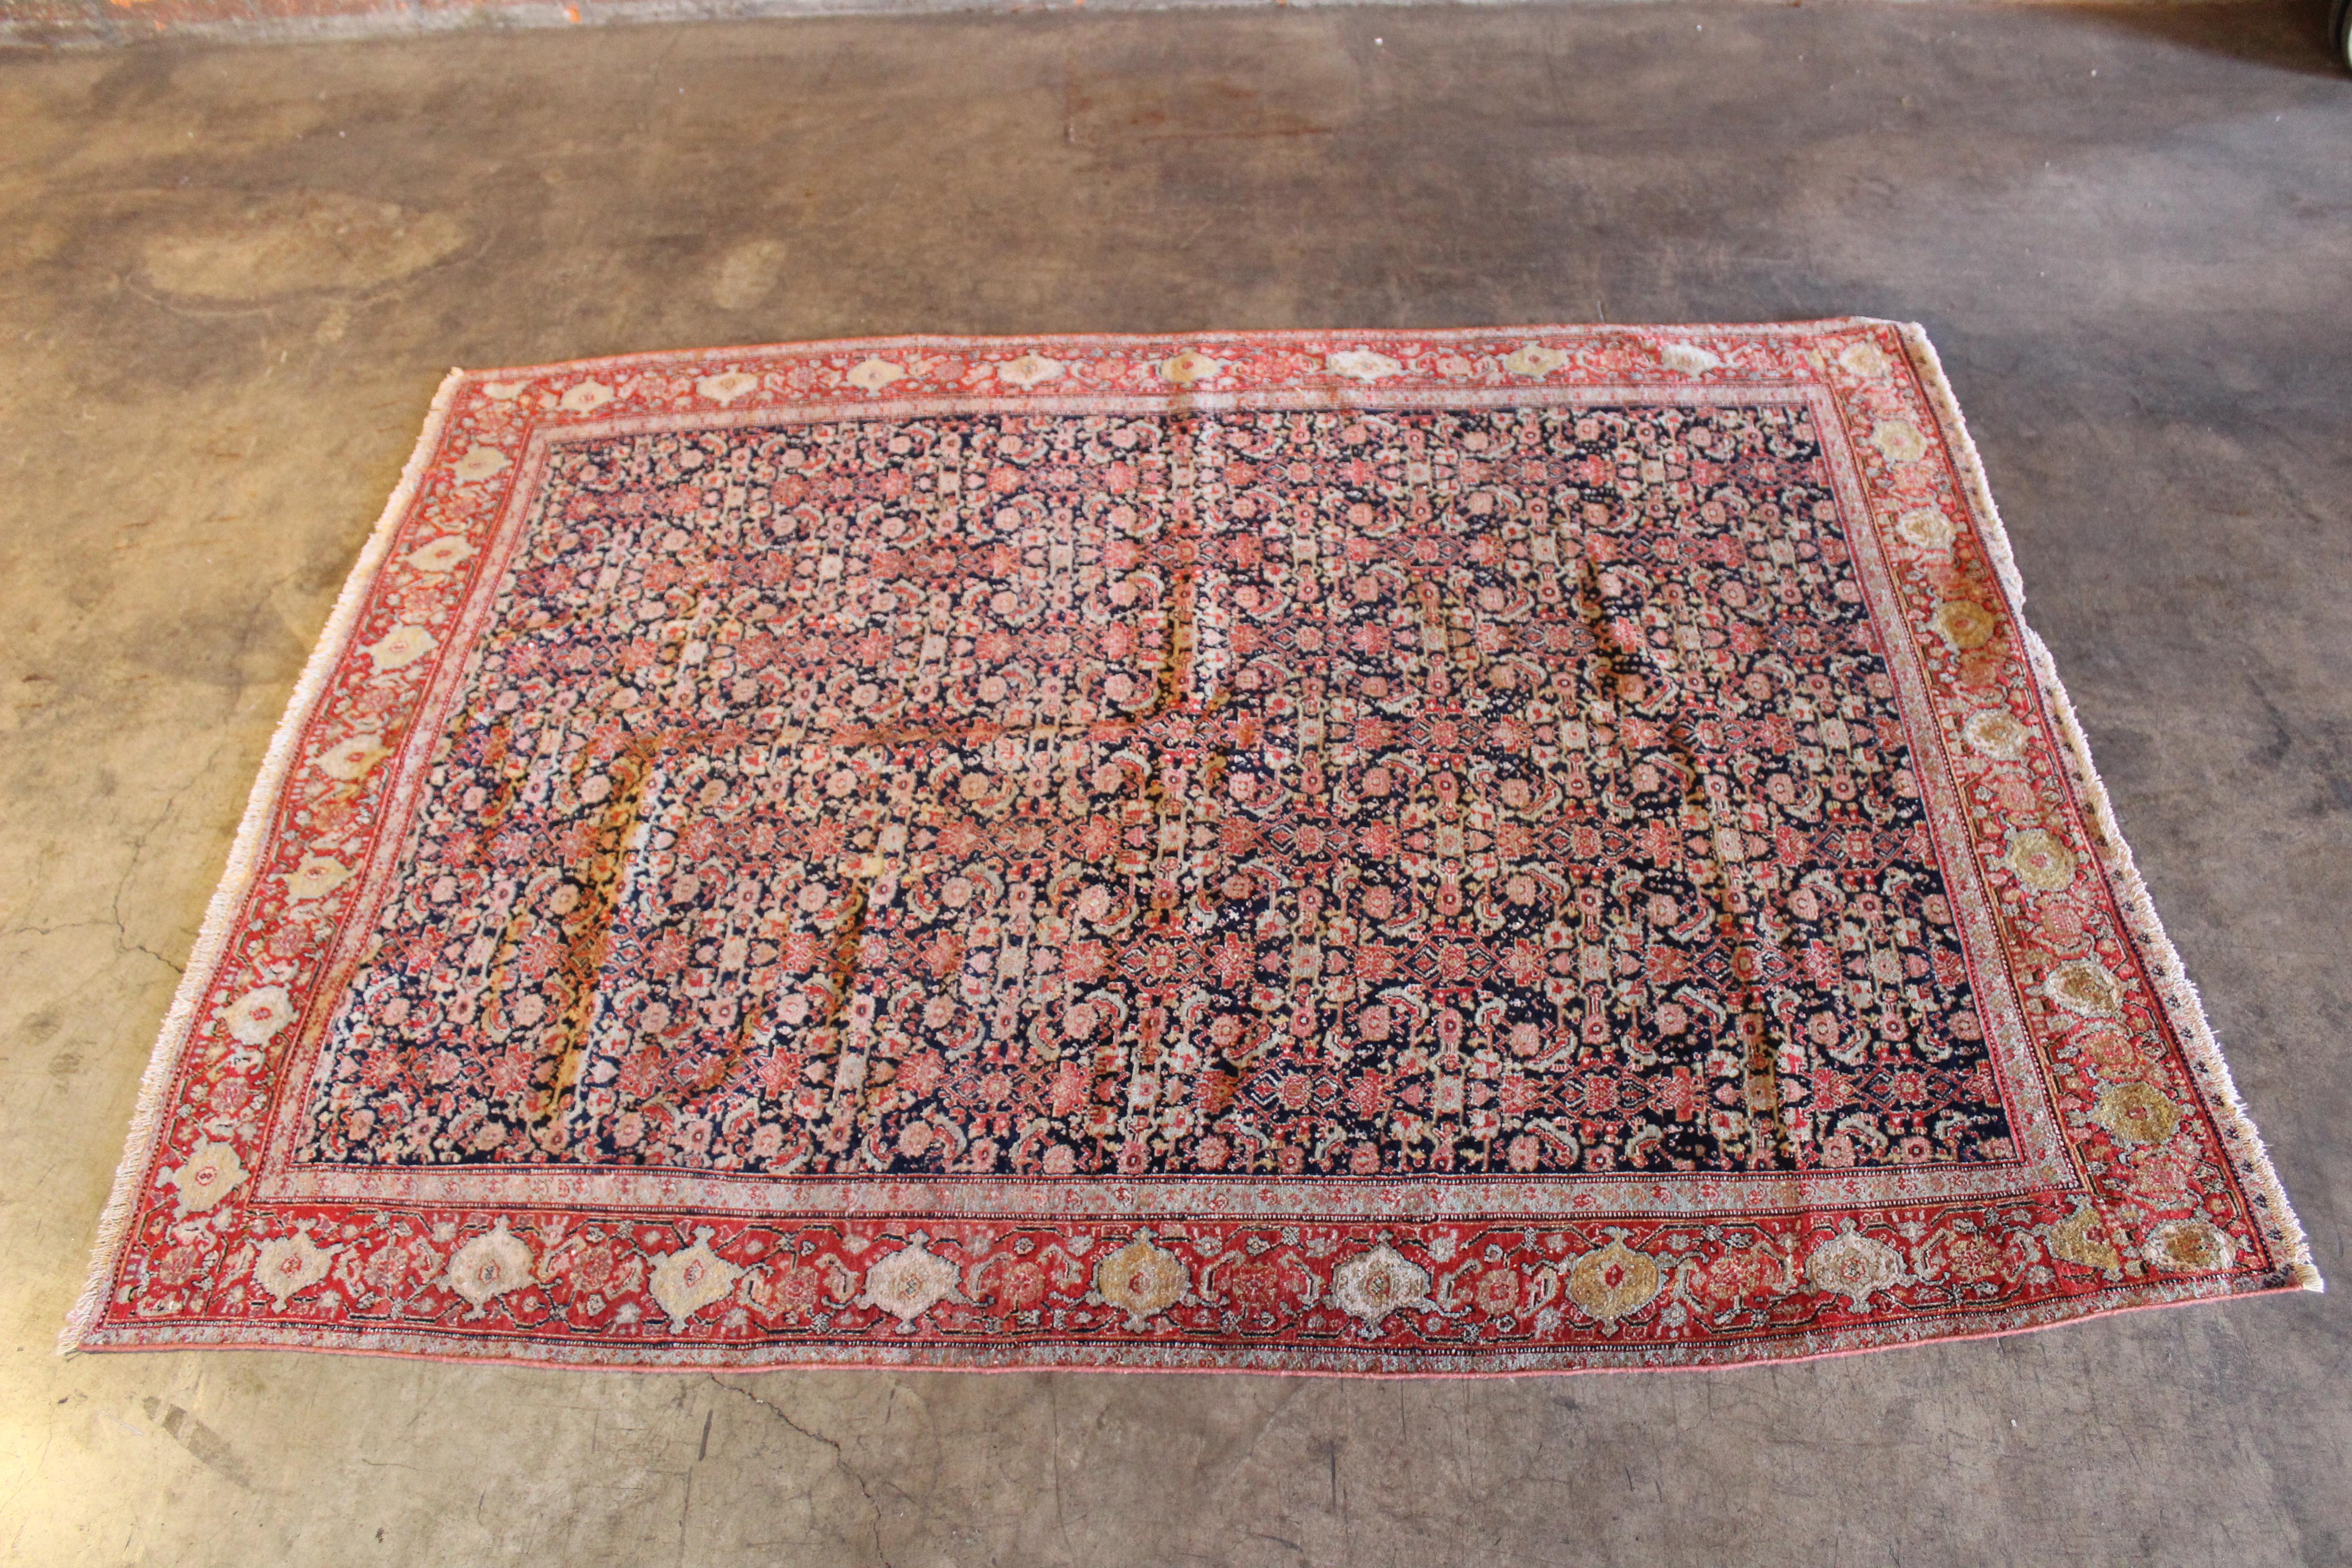 A vintage 1920s flatweave Persian wool senneh rug. In wonderful condition, professionally cleaned and repaired.